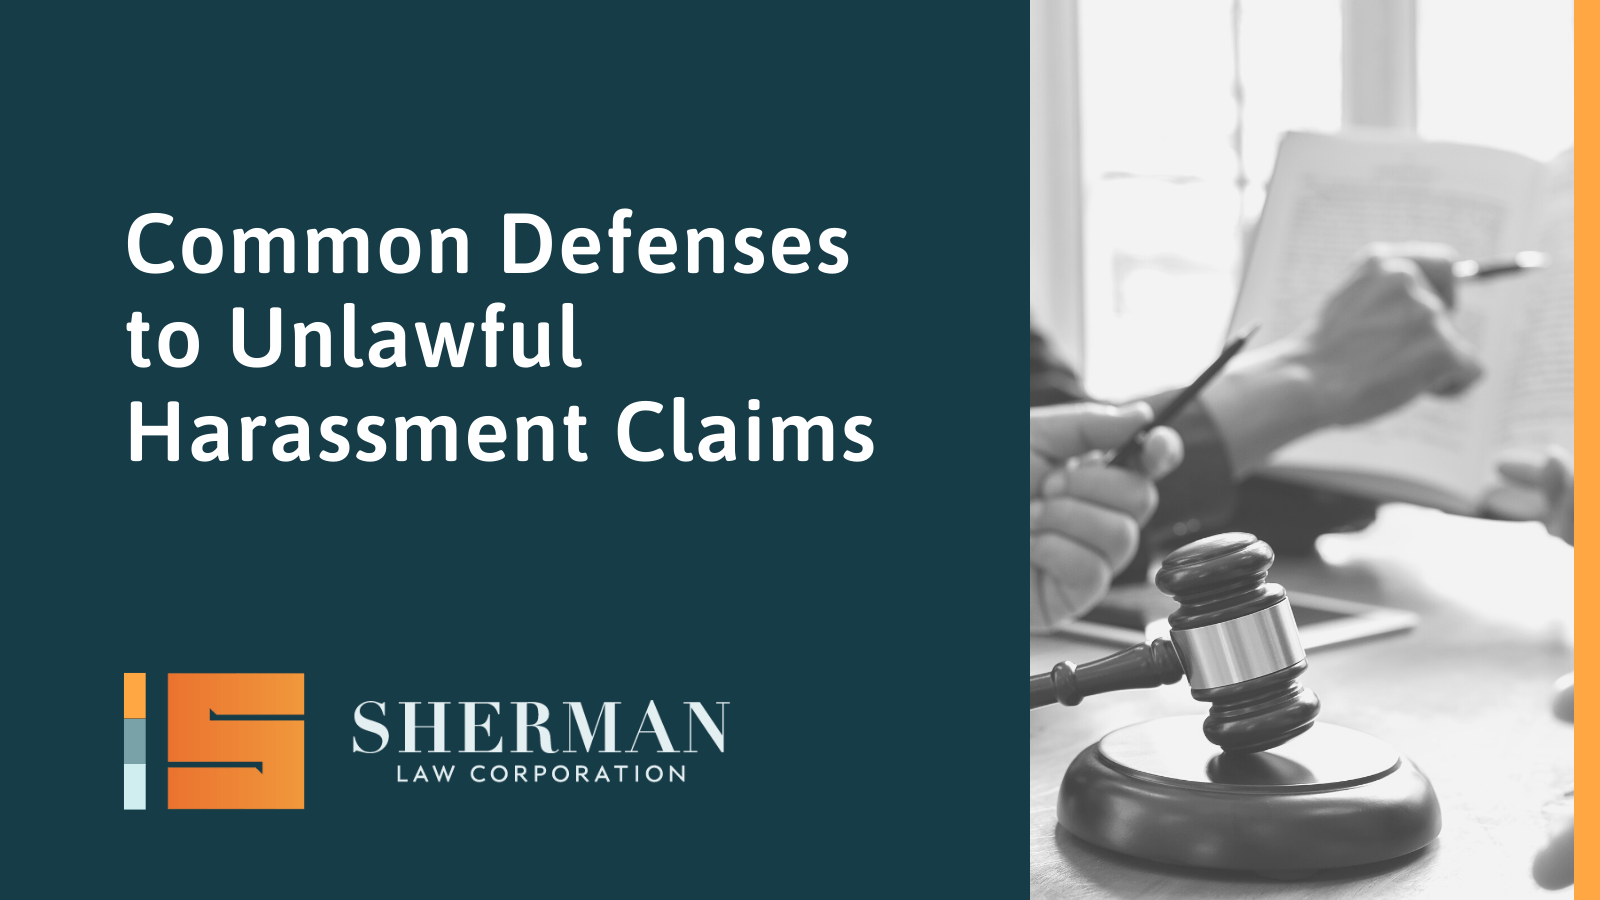 Common Defenses to Unlawful Harassment Claims - california employment lawyer - sherman law corporation